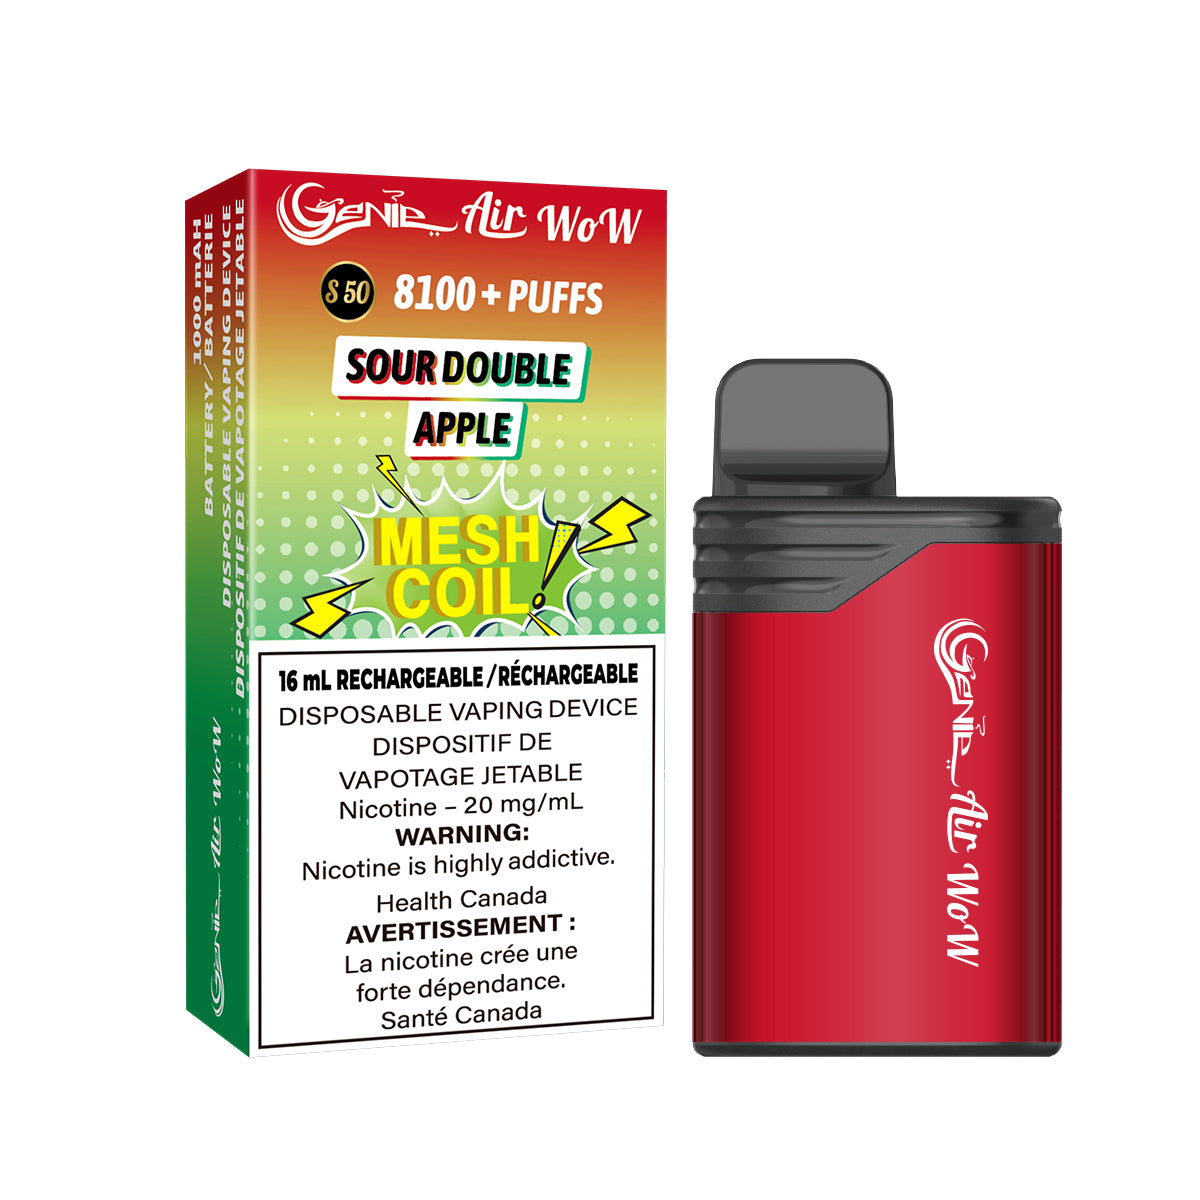 GENIE AIR WOW - sour double apple 8100 Puffs  20 mg / mL Salt Nicotine  Juice Capacity: 16 mL  Battery: 1000 mAh Rechargeable   Mesh Coil Technology    s50